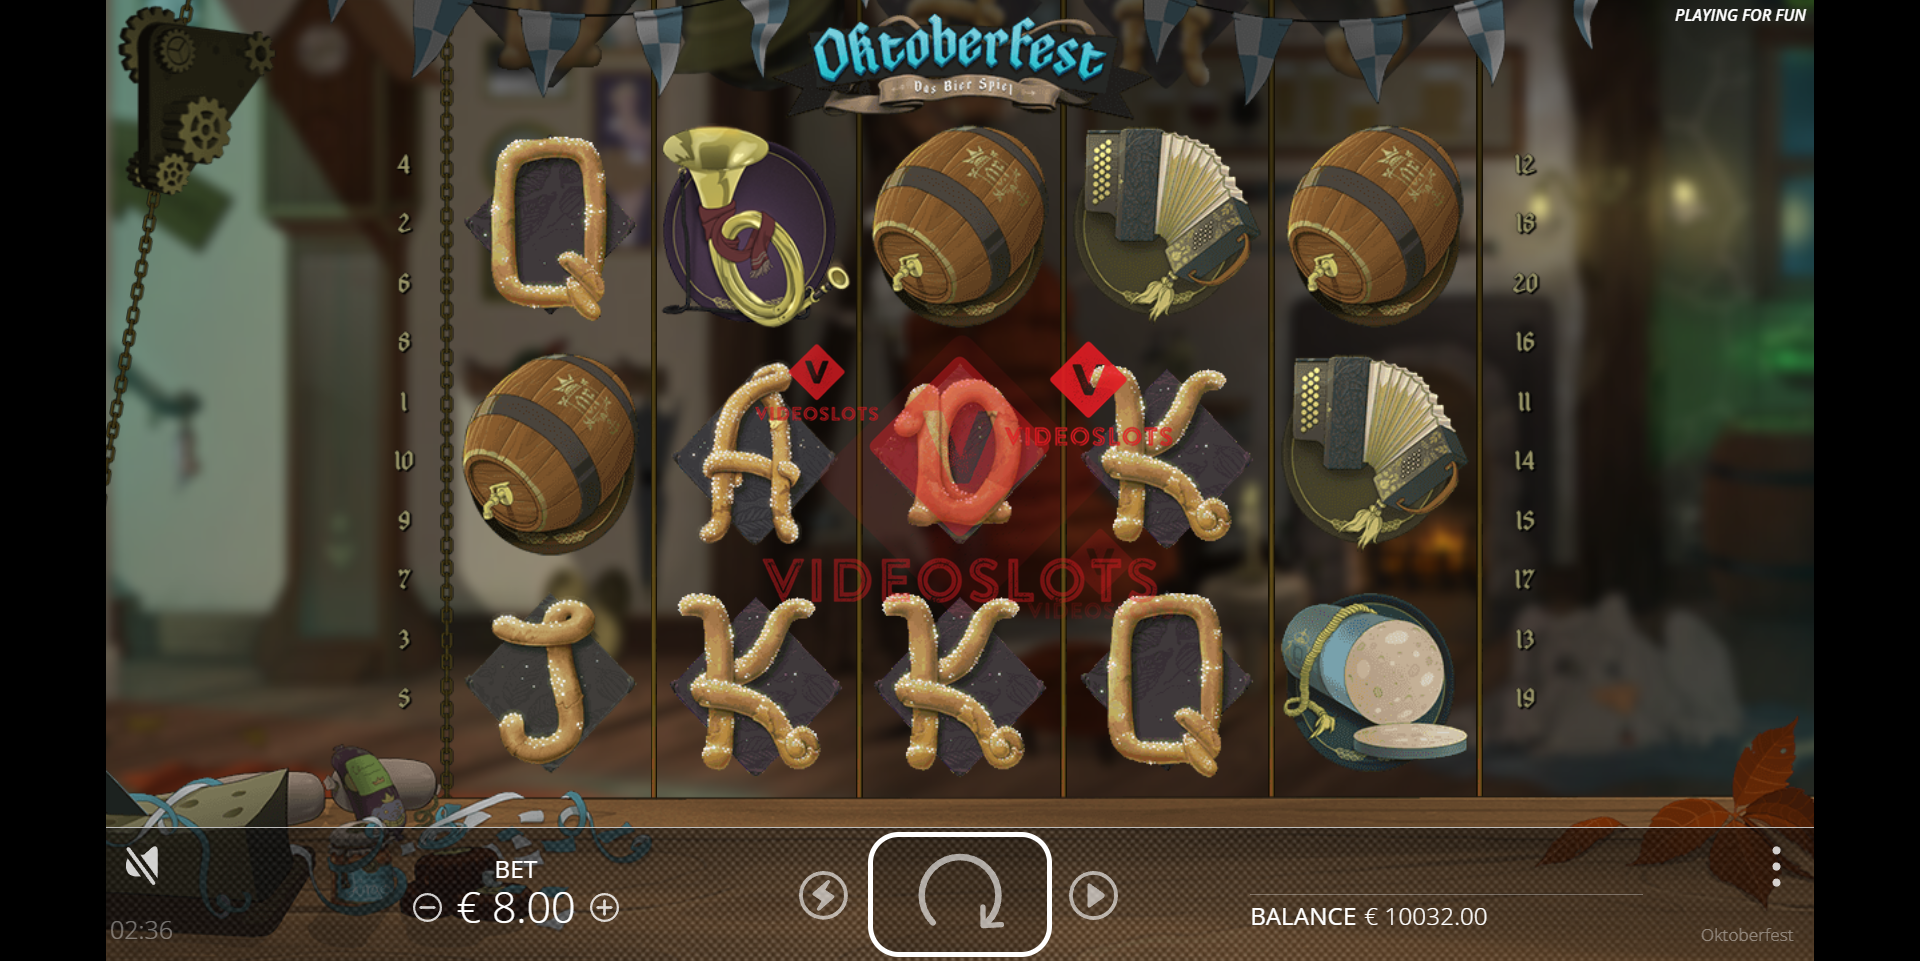 Base Game for Oktoberfest slot from NoLimit City